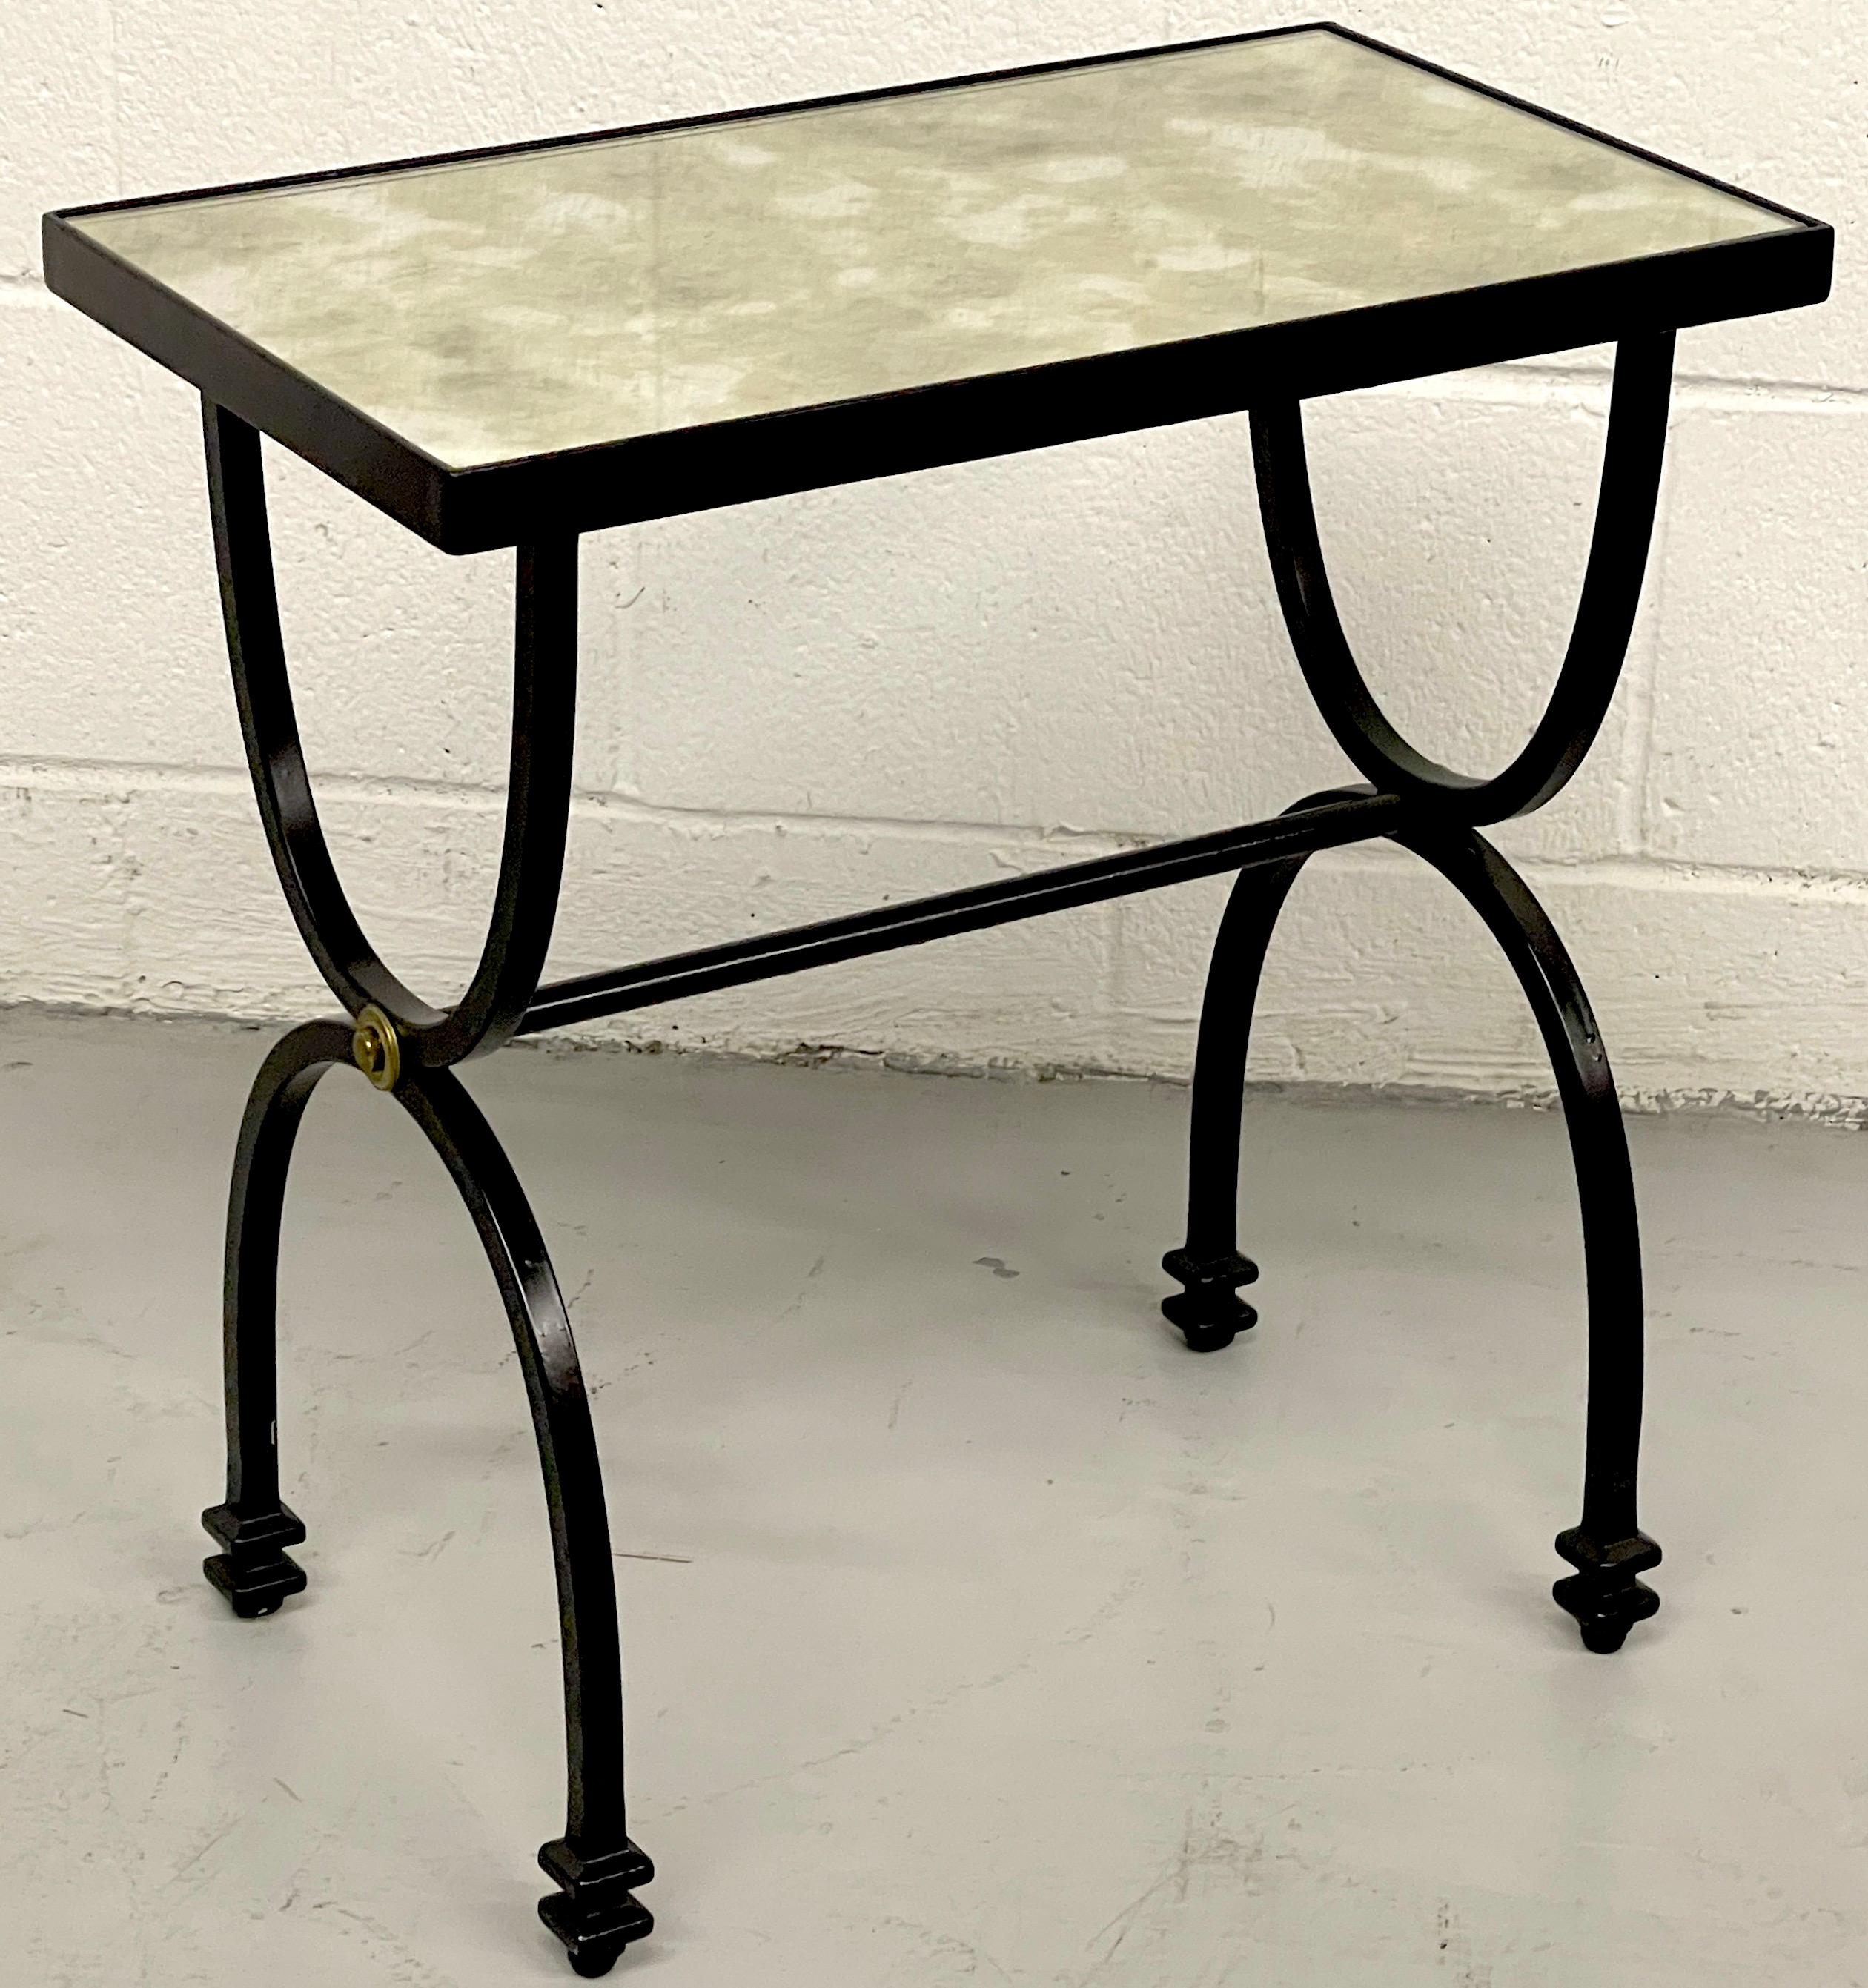 Diminutive French Modern Style side table, Style of Maison Jansen 
France, Late 20th C
Of rectangular form, with inset distressed mirror (removable) supported on a blackened iron and brass mounted curule stretcher base. 
Overall